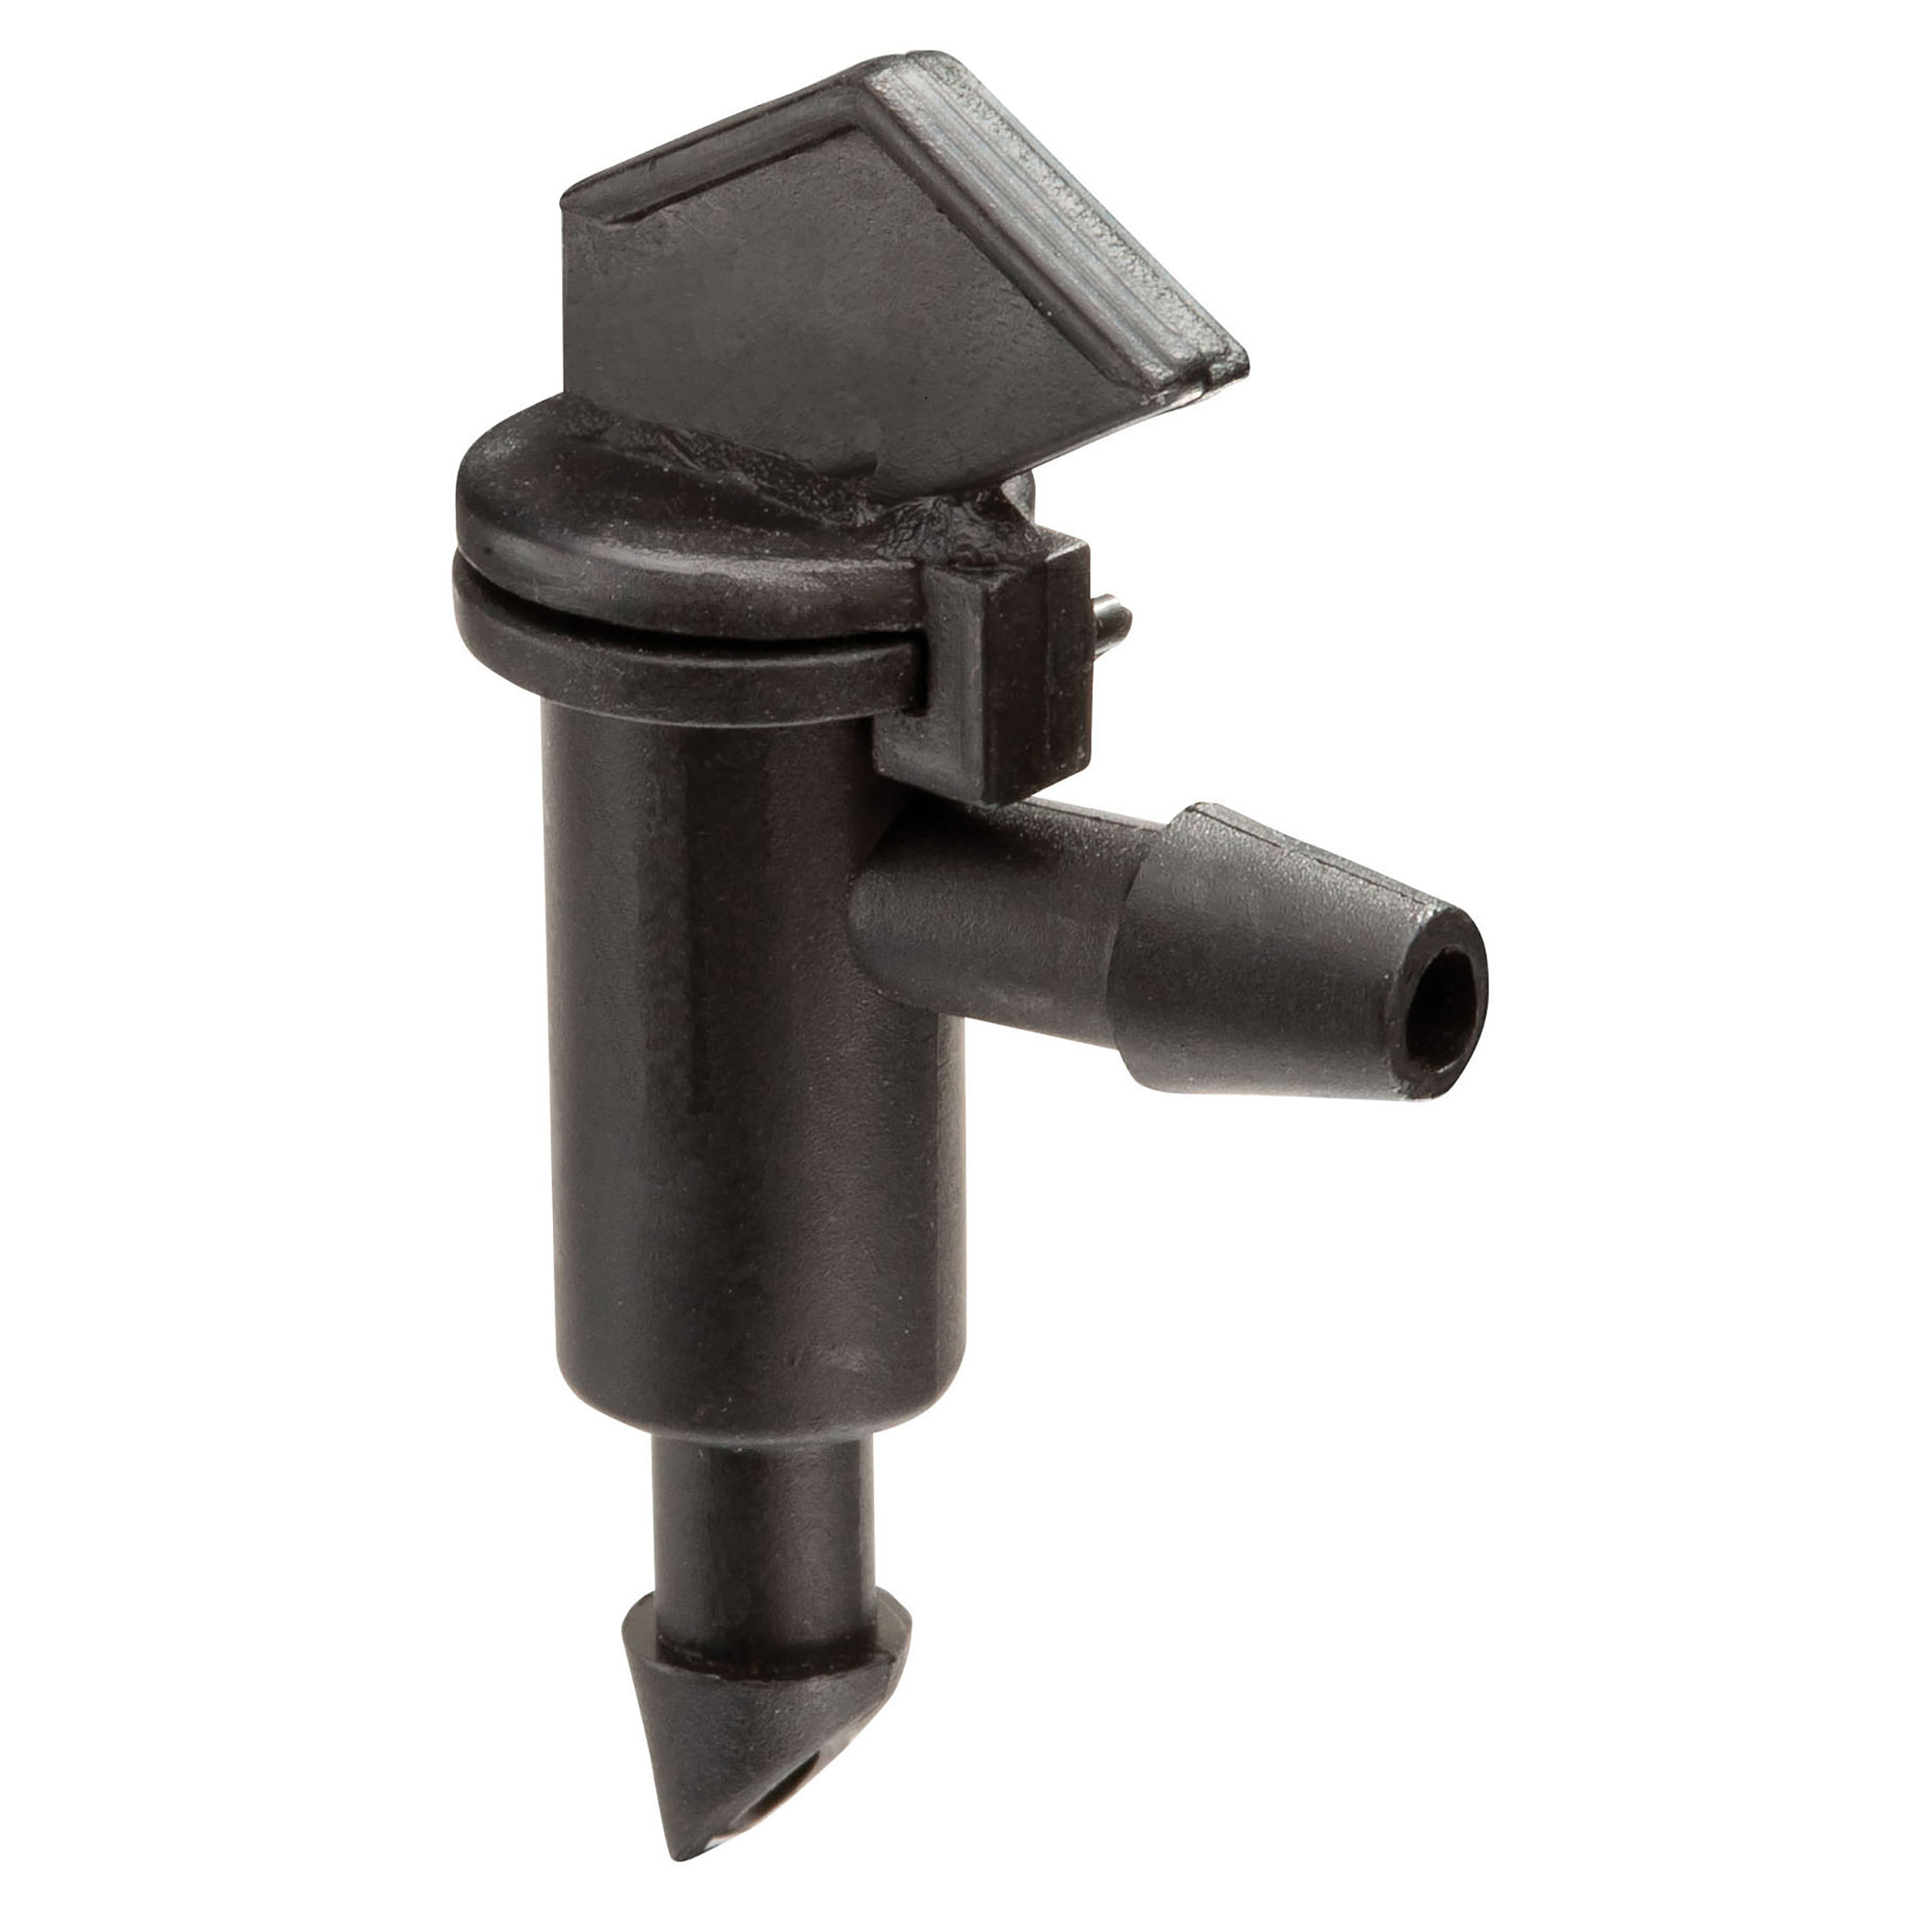 FE10-25SX Dripper Emitter, Flag Style, 1/4, 1/2 in Connection, Barb, Drip, 1 gph, Plastic, Black